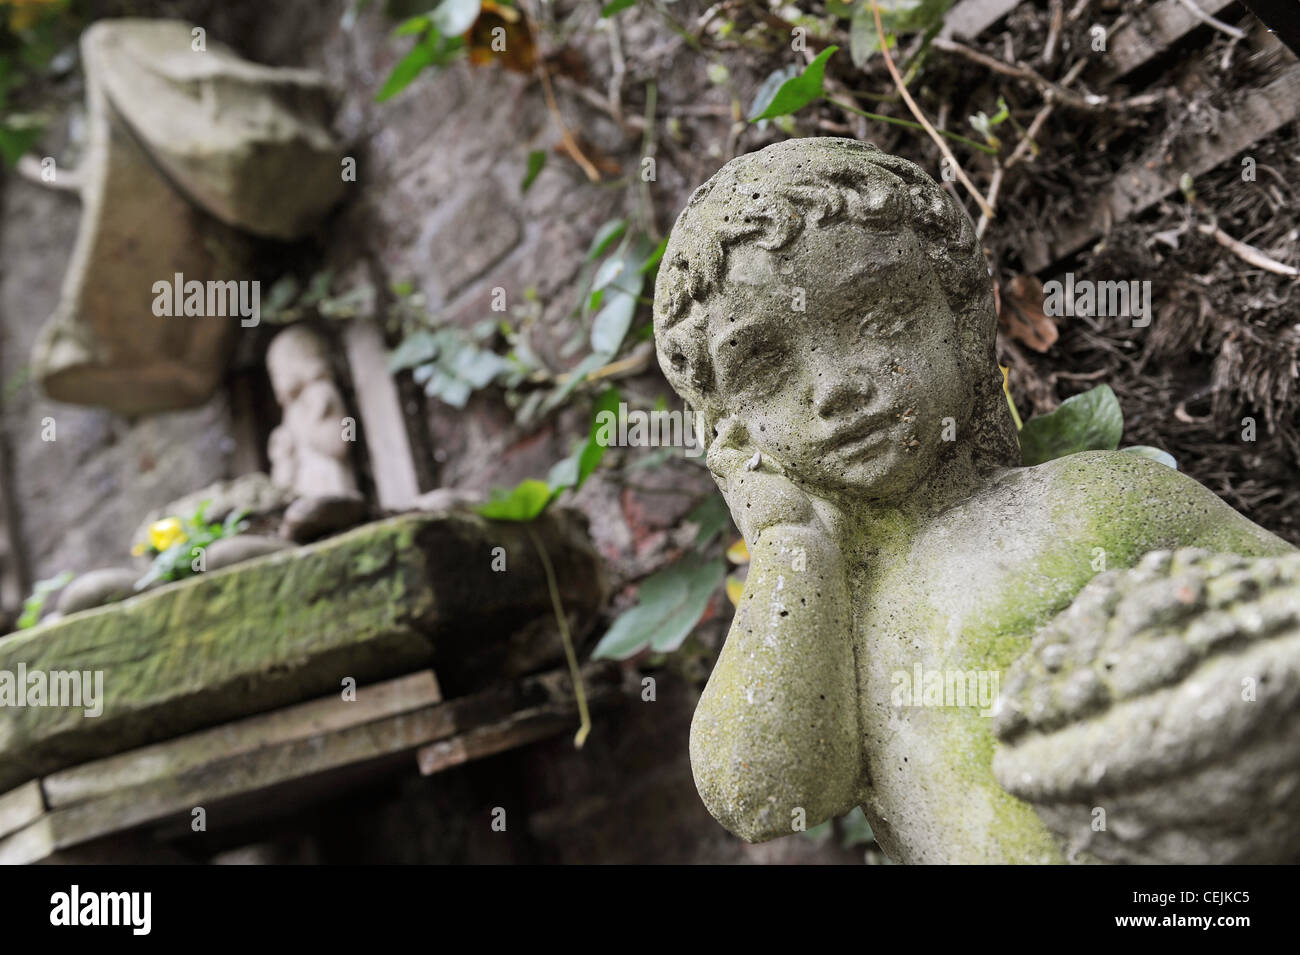 Hidden Treasure Child statue with garden feature on the wall in background Stock Photo